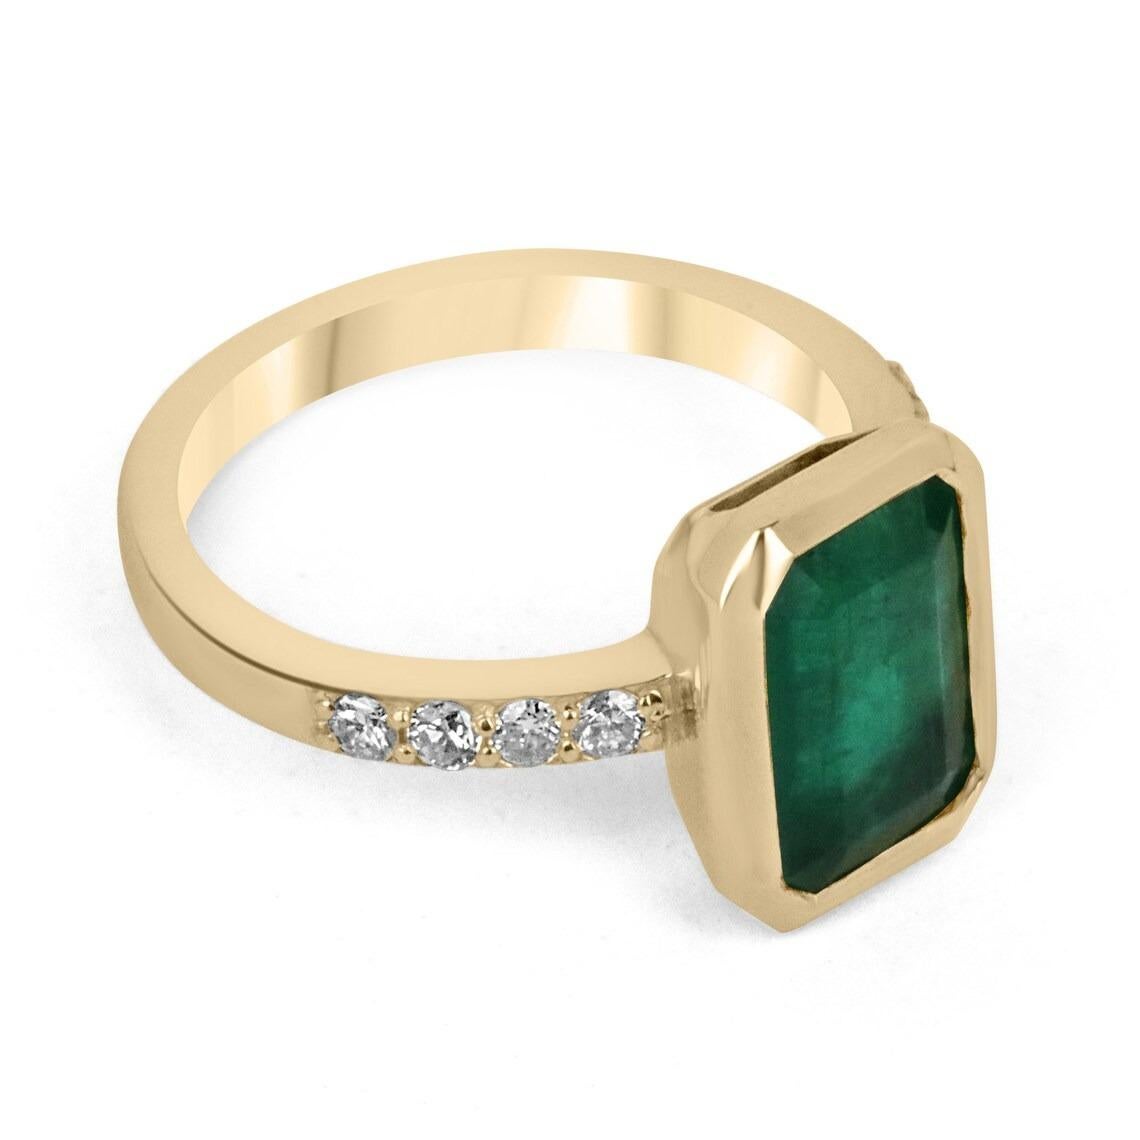 A remarkable emerald and diamond engagement ring. The center stone showcases a striking natural Zambian emerald with superior characteristics such as its deep green color, very good luster, and clarity. Natural internal inclusions are common in all